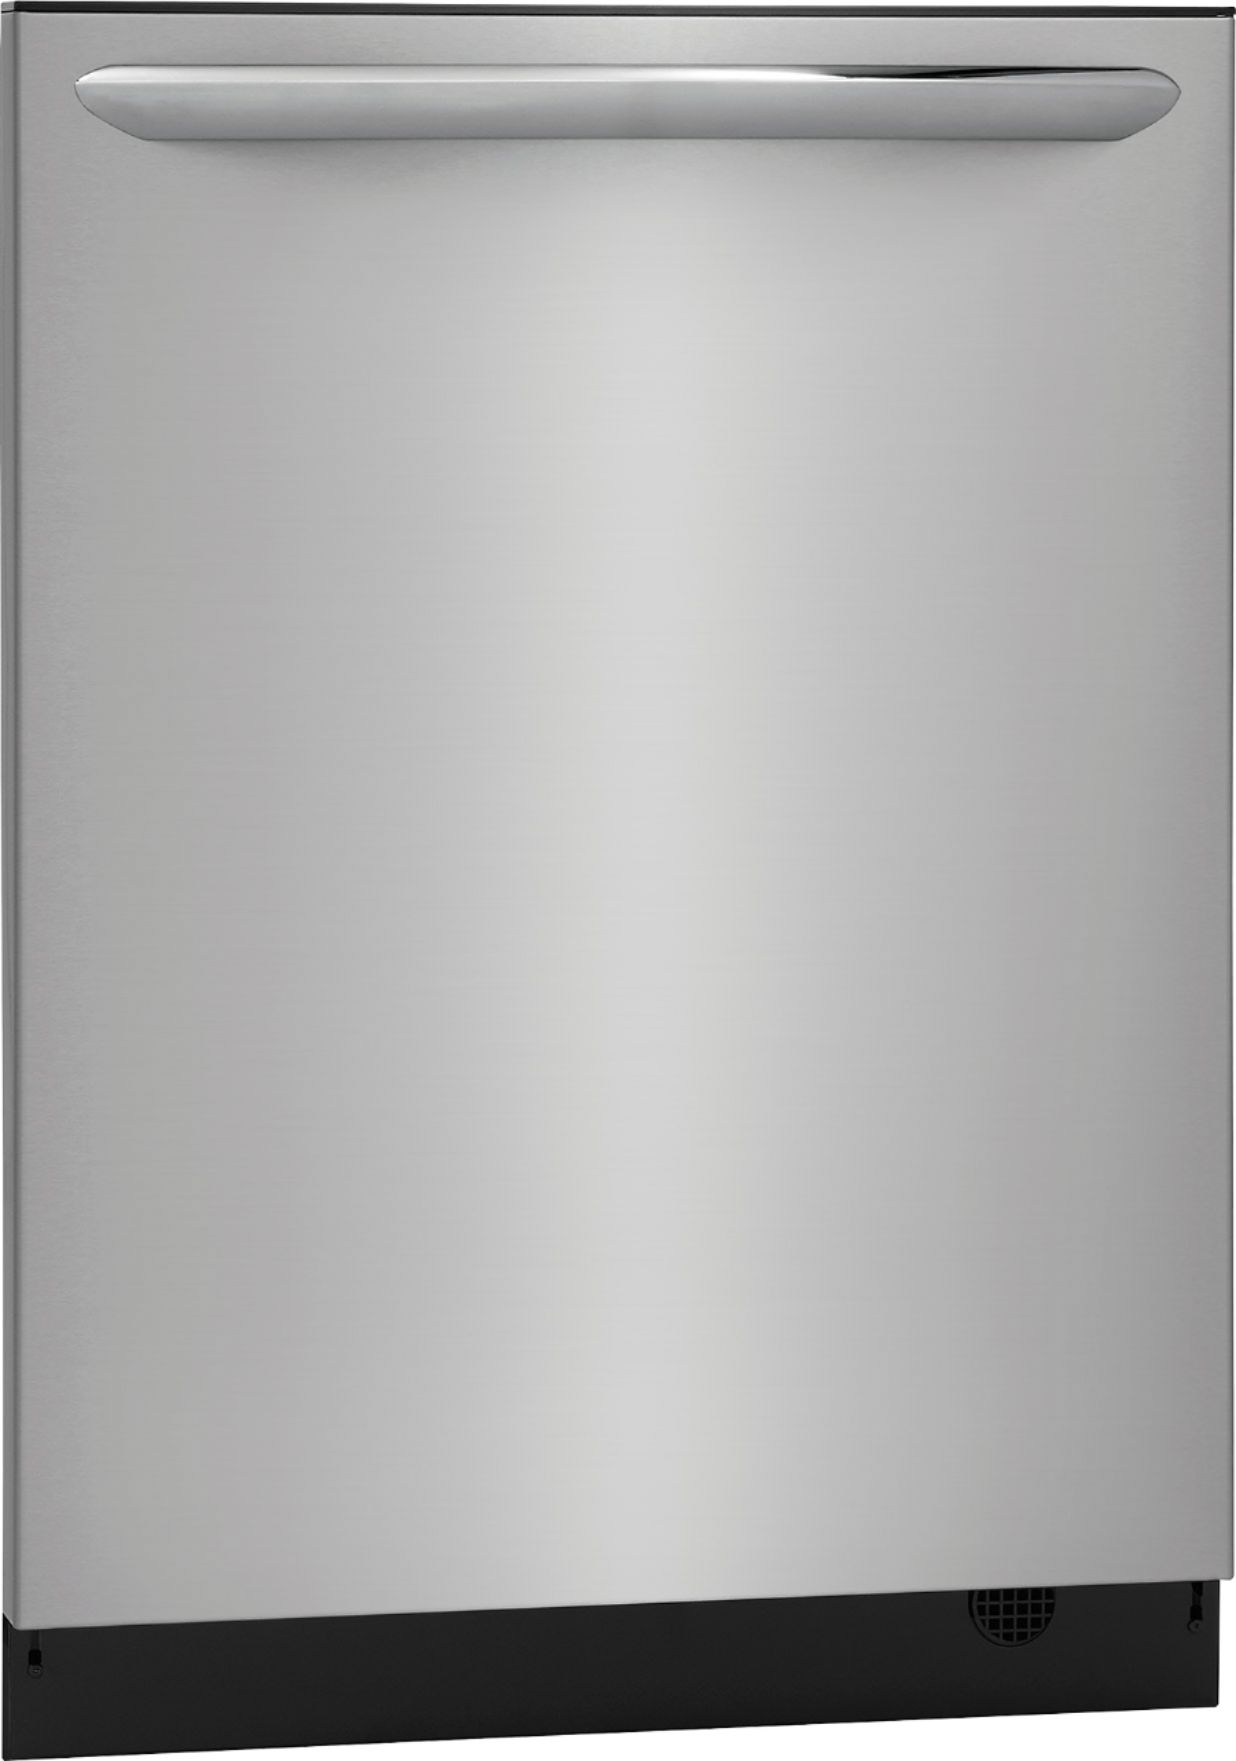 Angle View: Samsung - 24" Top Control Built-In Dishwasher - Black Stainless Steel